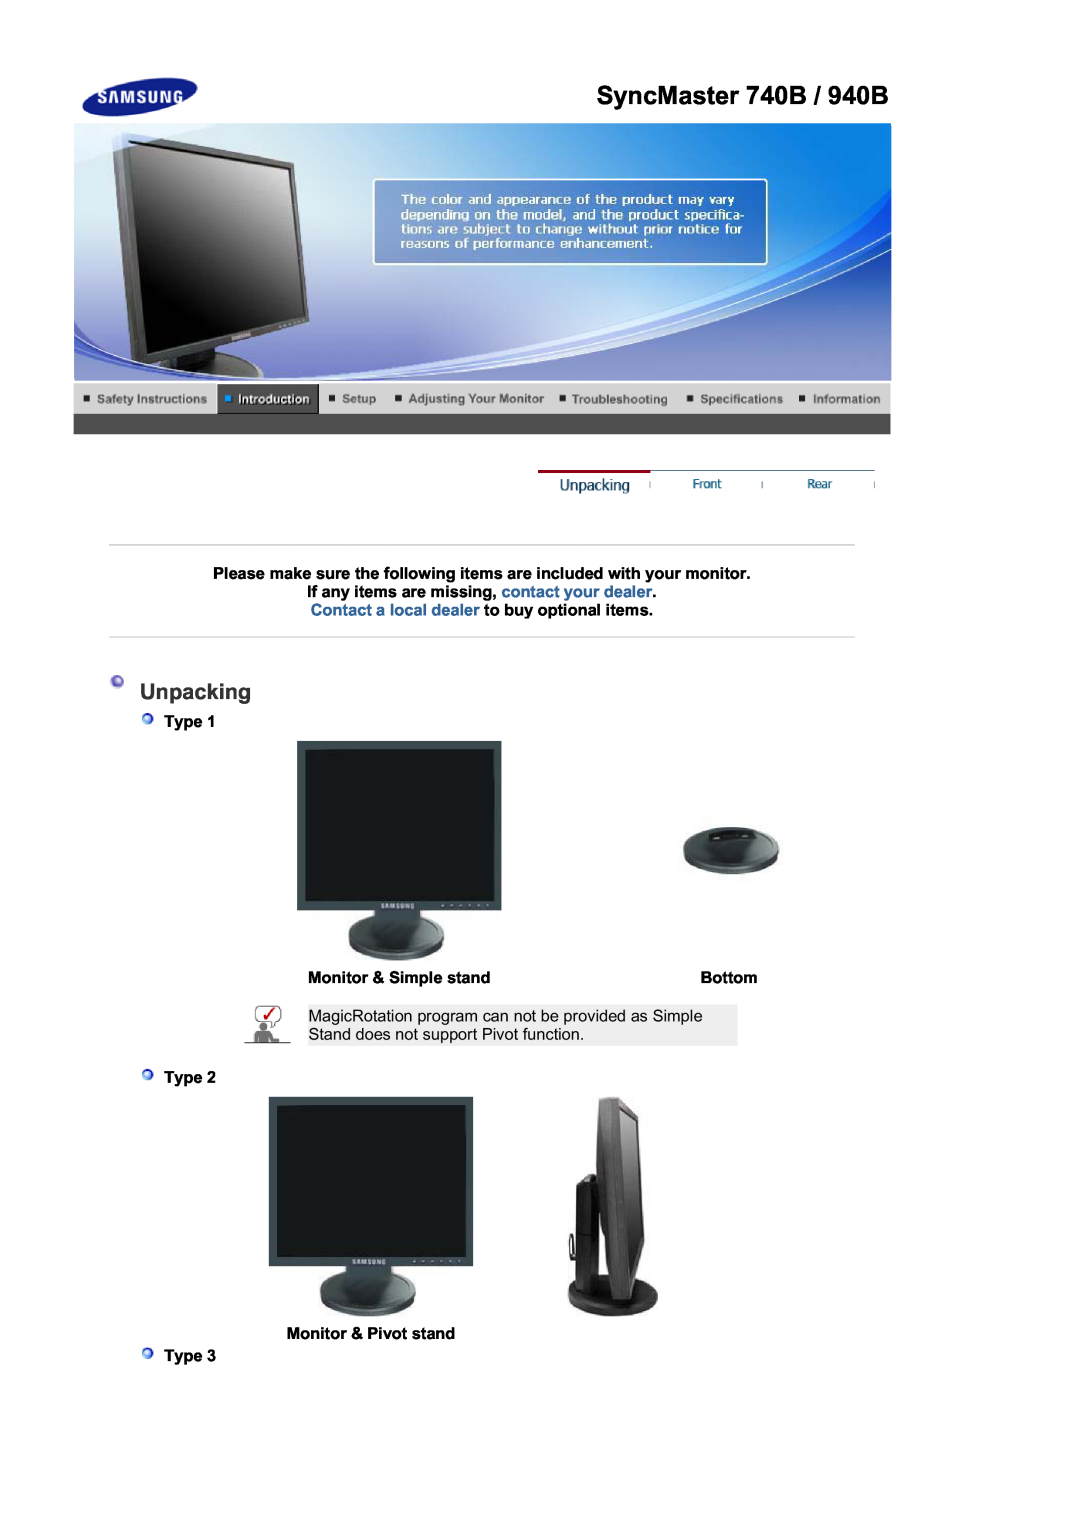 Samsung 940FN SyncMaster 740B / 940B, Unpacking, Please make sure the following items are included with your monitor, Type 